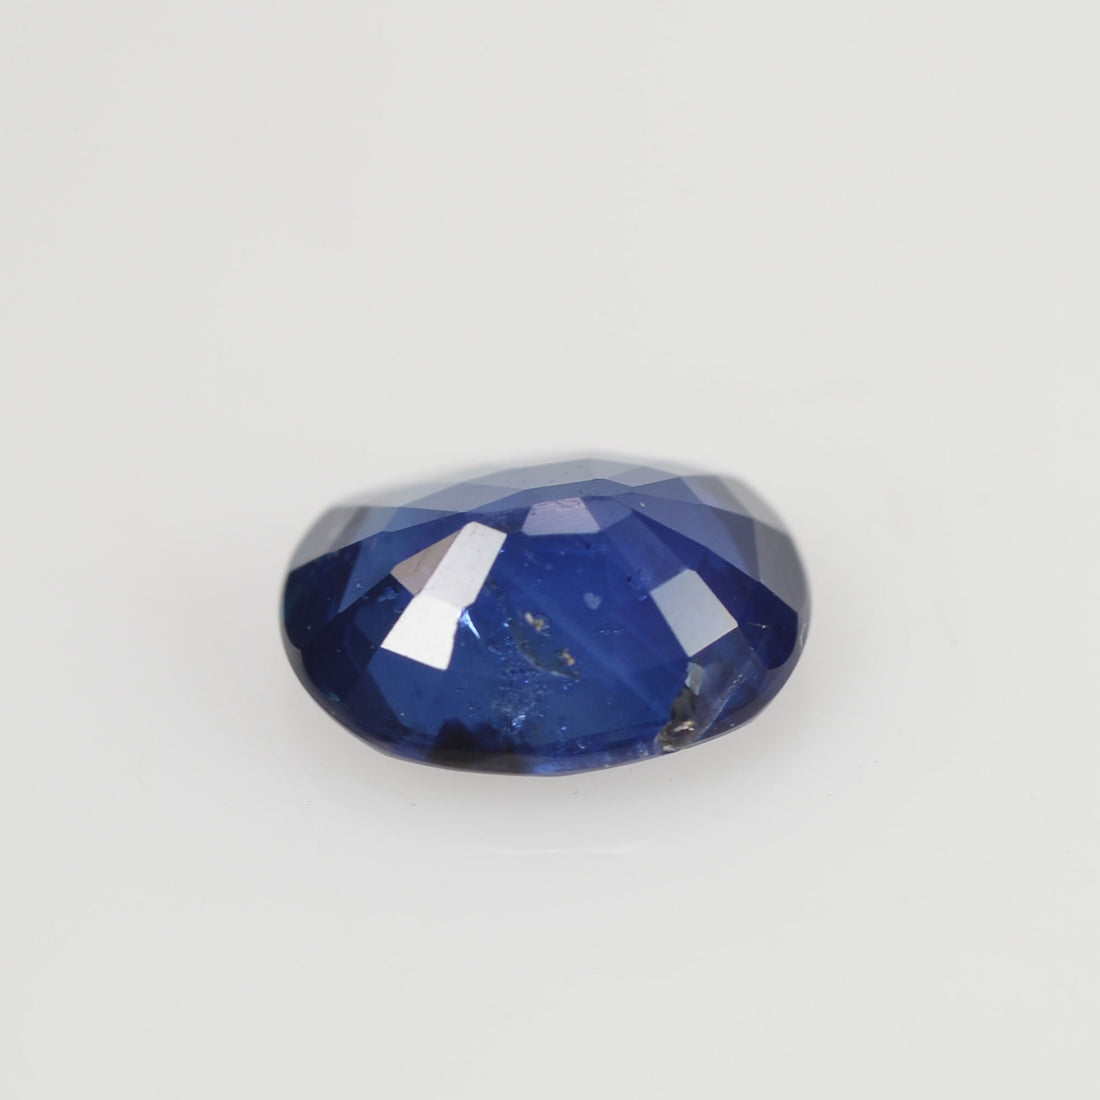 0.84 Cts Natural Blue Sapphire Loose Gemstone Oval Cut